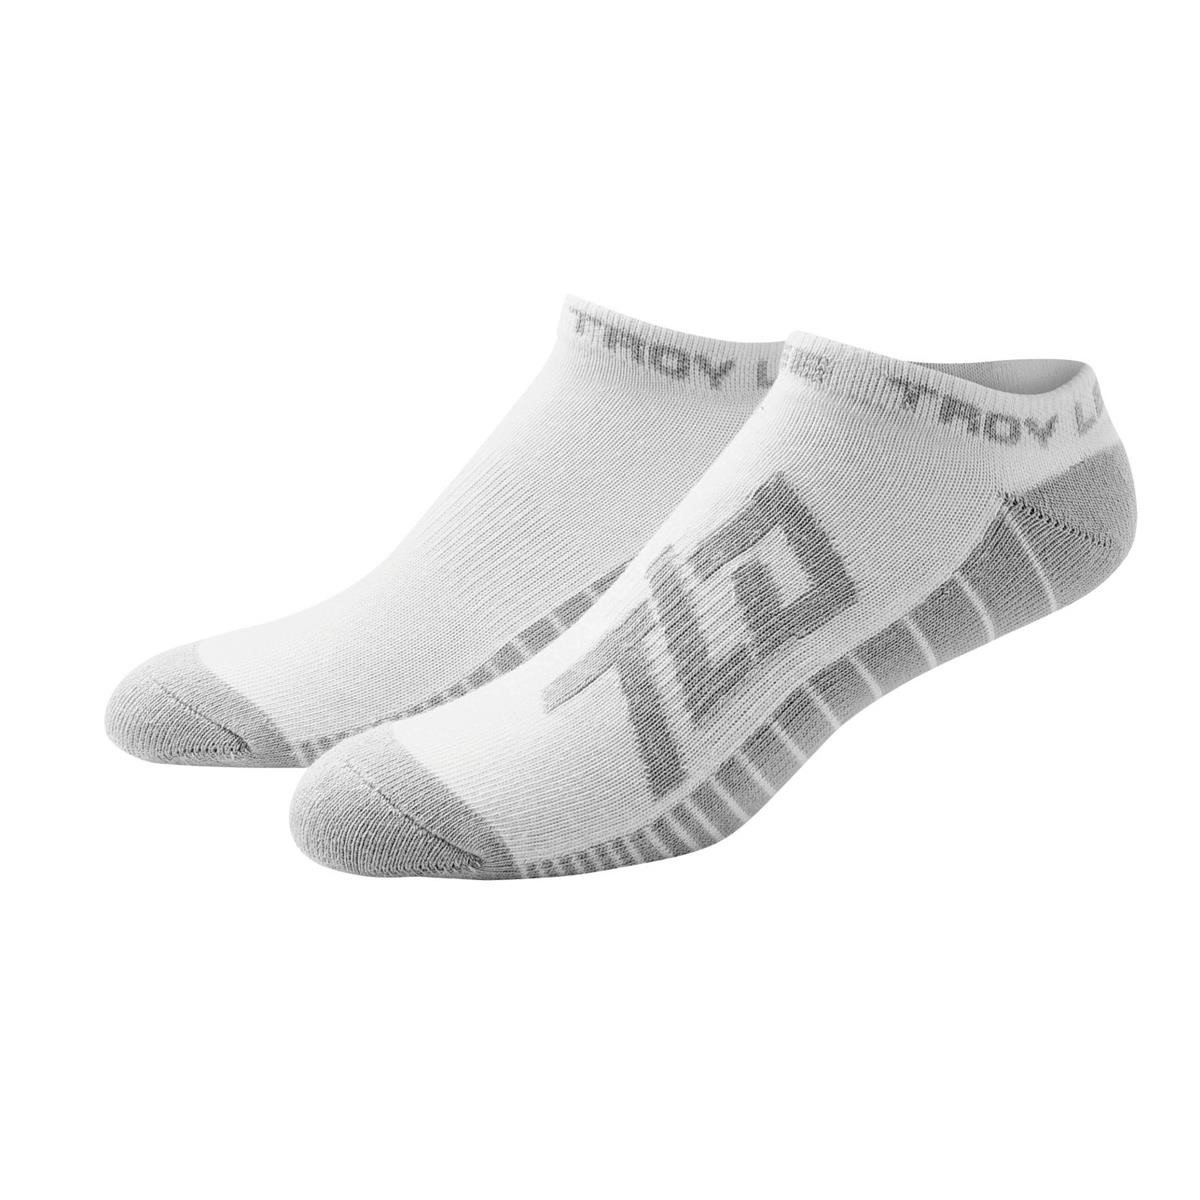 Troy Lee Designs Socks Factory Ankle White, 3 Pack